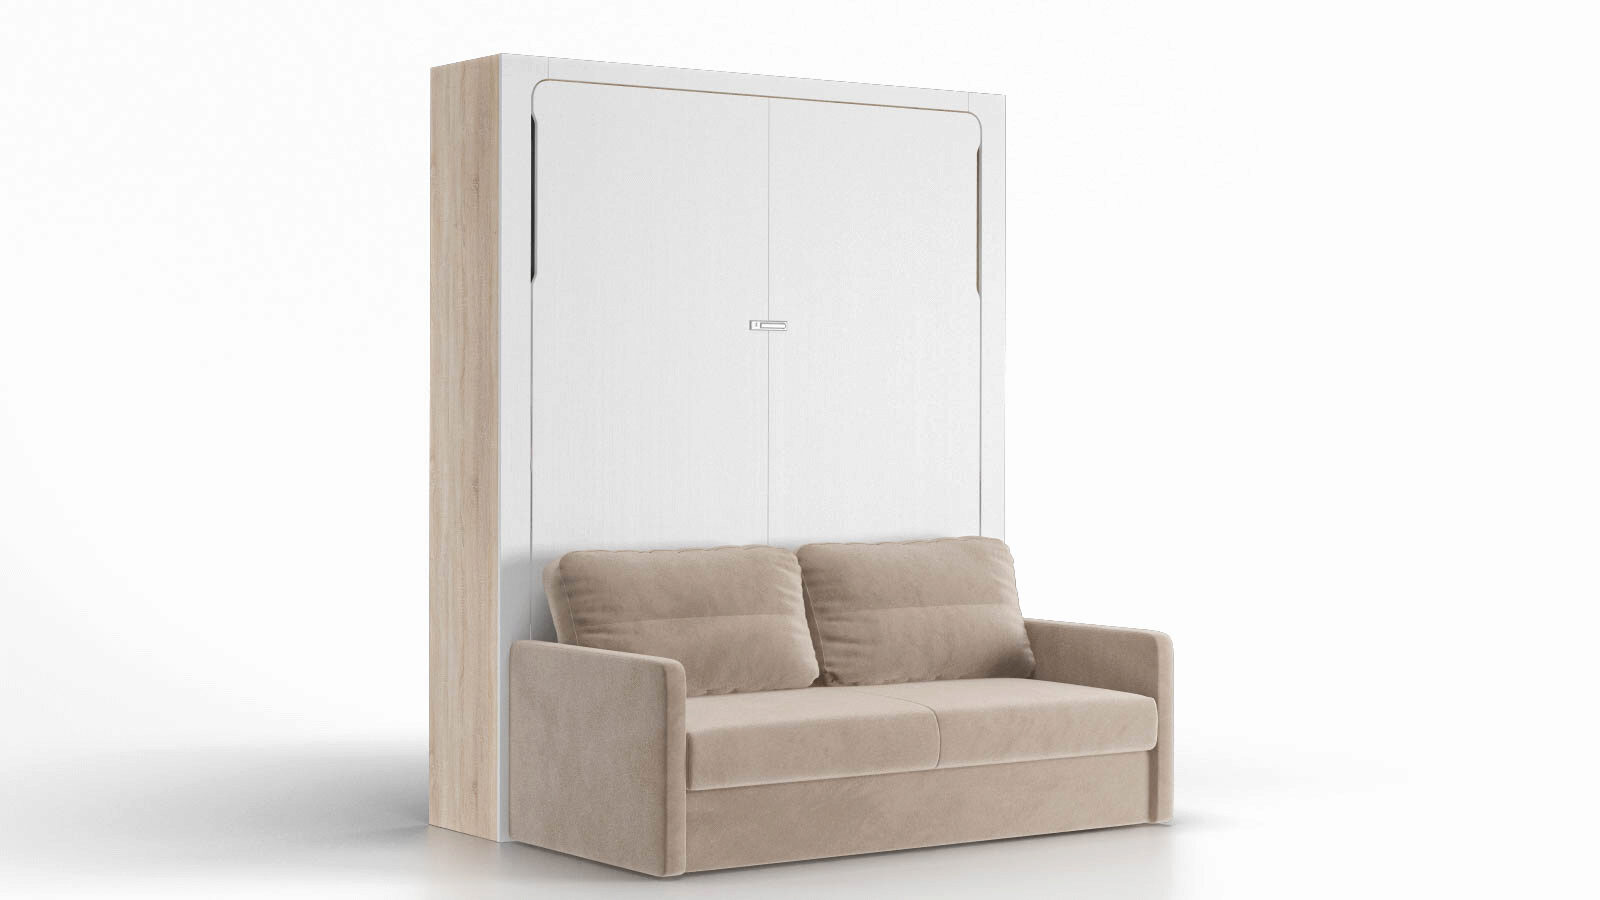   Wall Bed Life Time    ,    - :1741843 - -